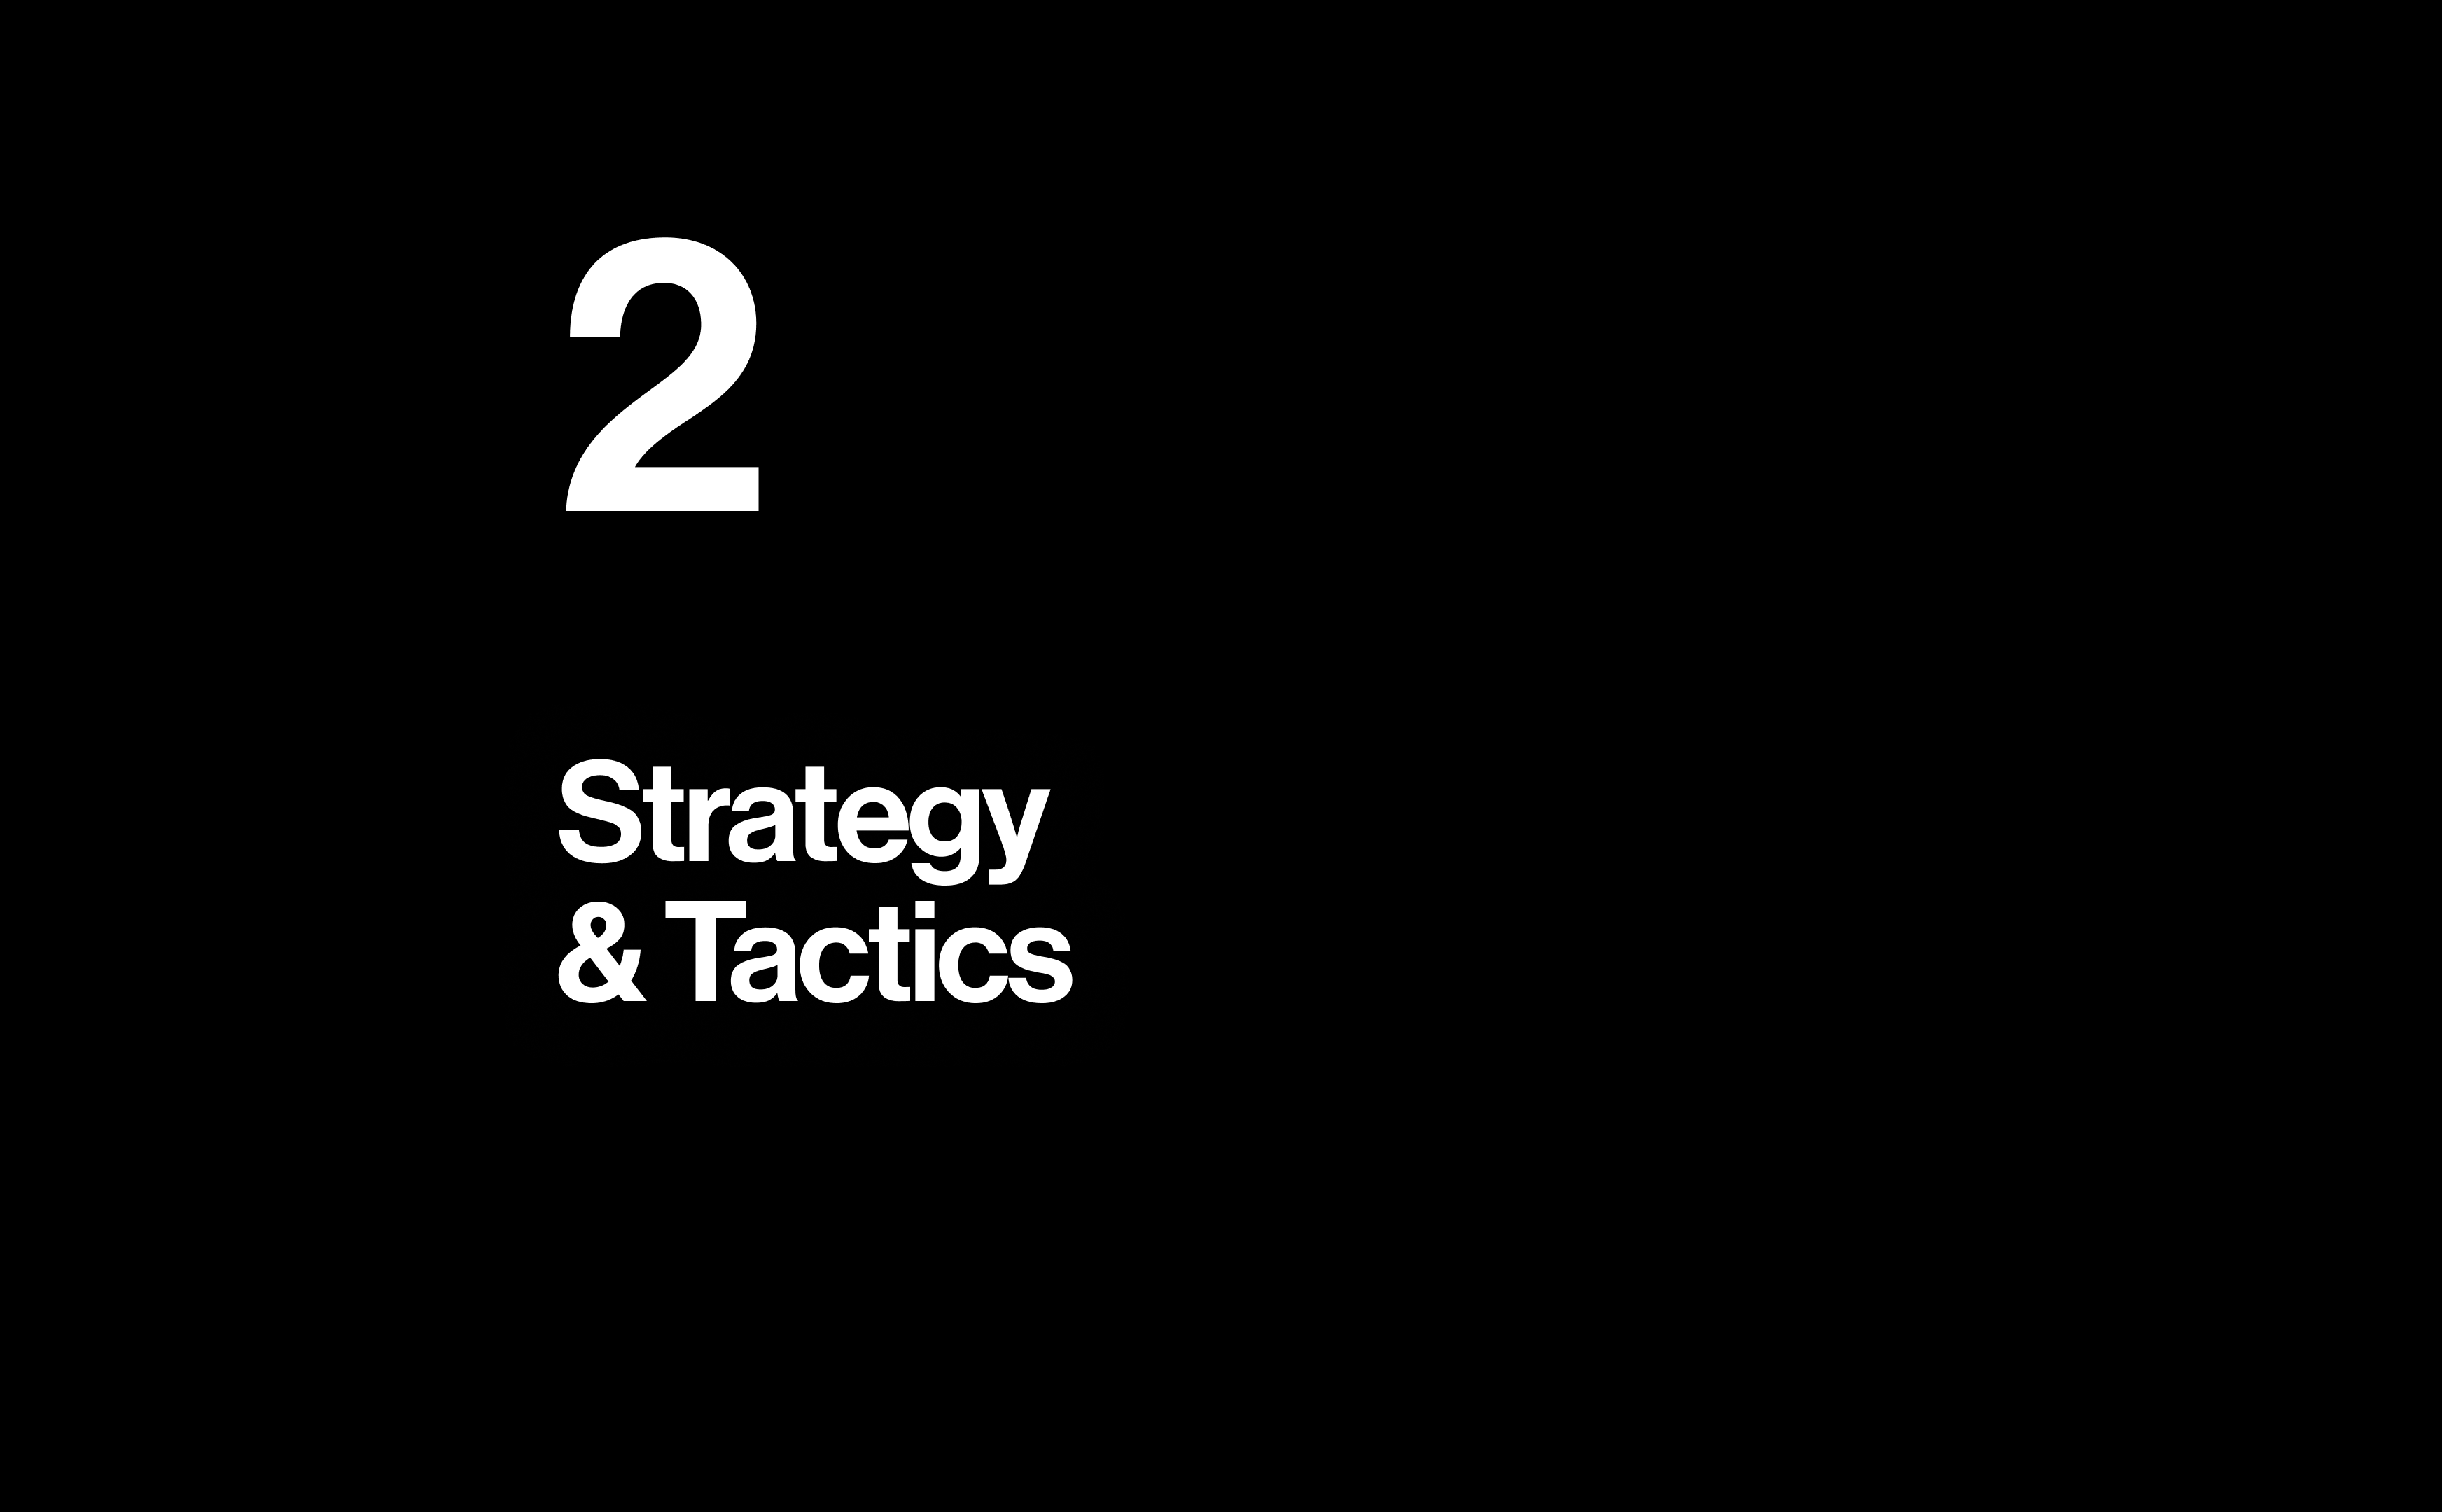 What is "strategy" and "tactics" in design?